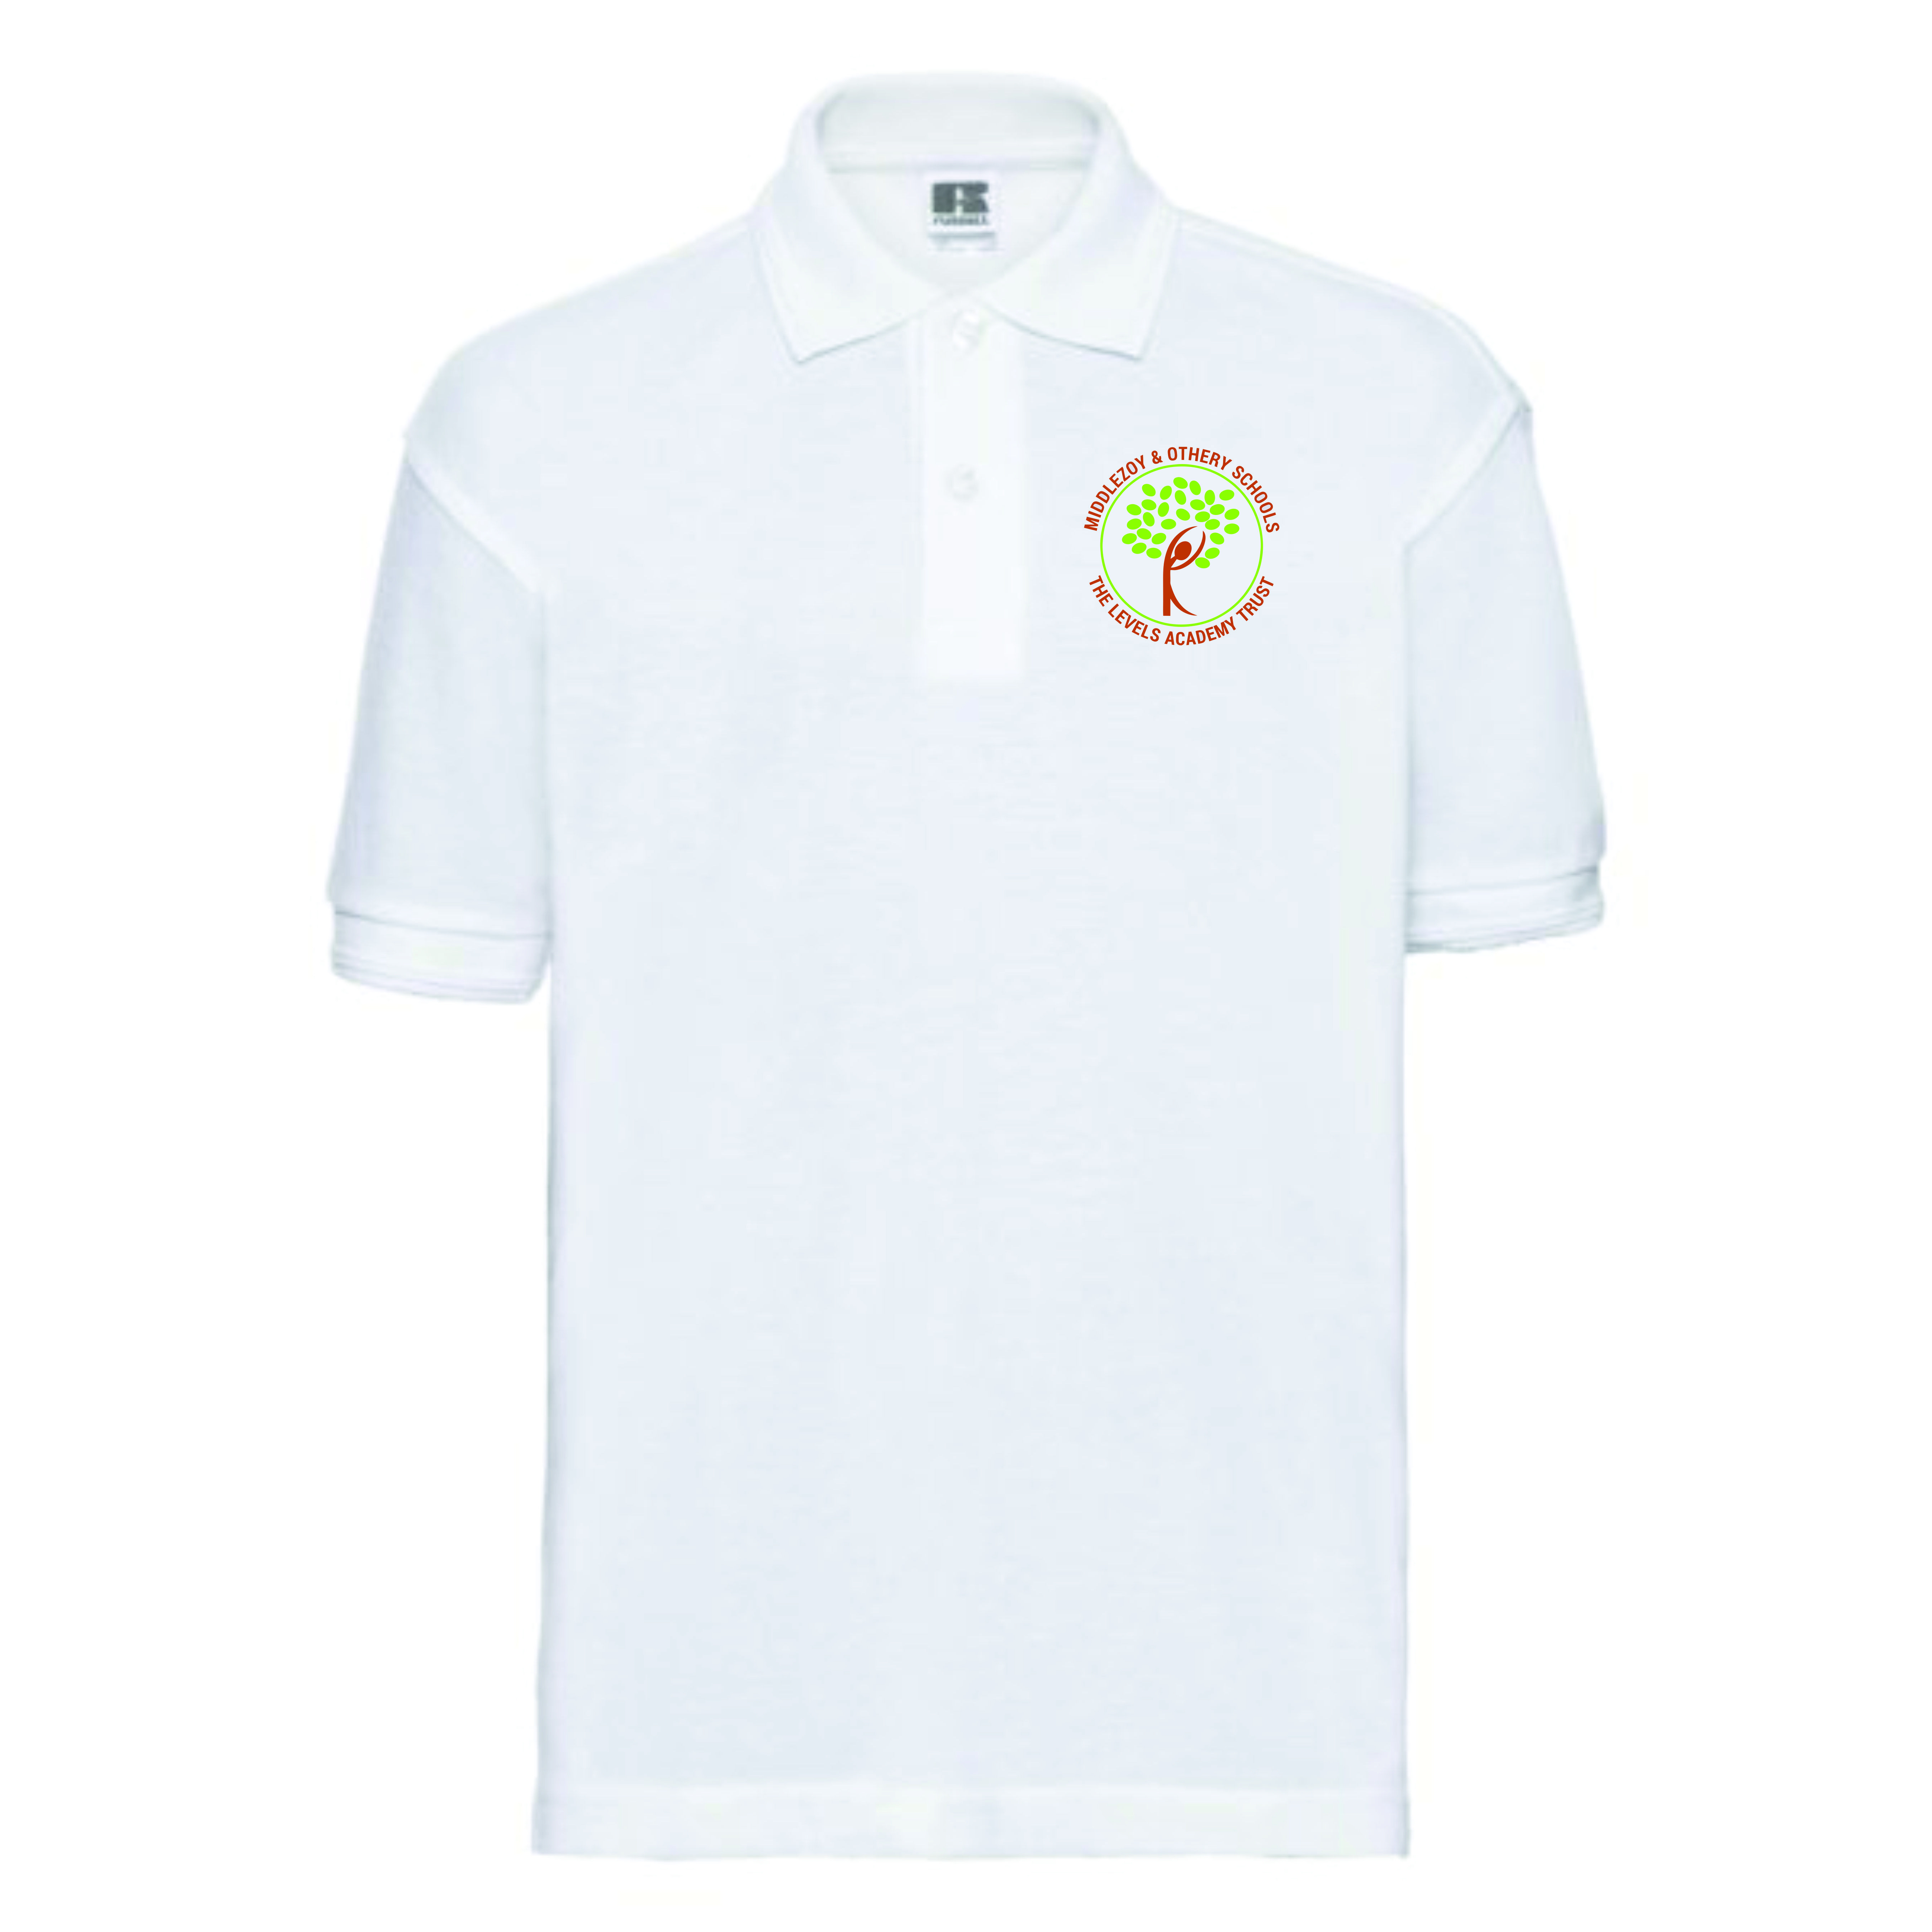 Middlezoy School Children's White Polo Shirt | Jual Branded Clothing ...